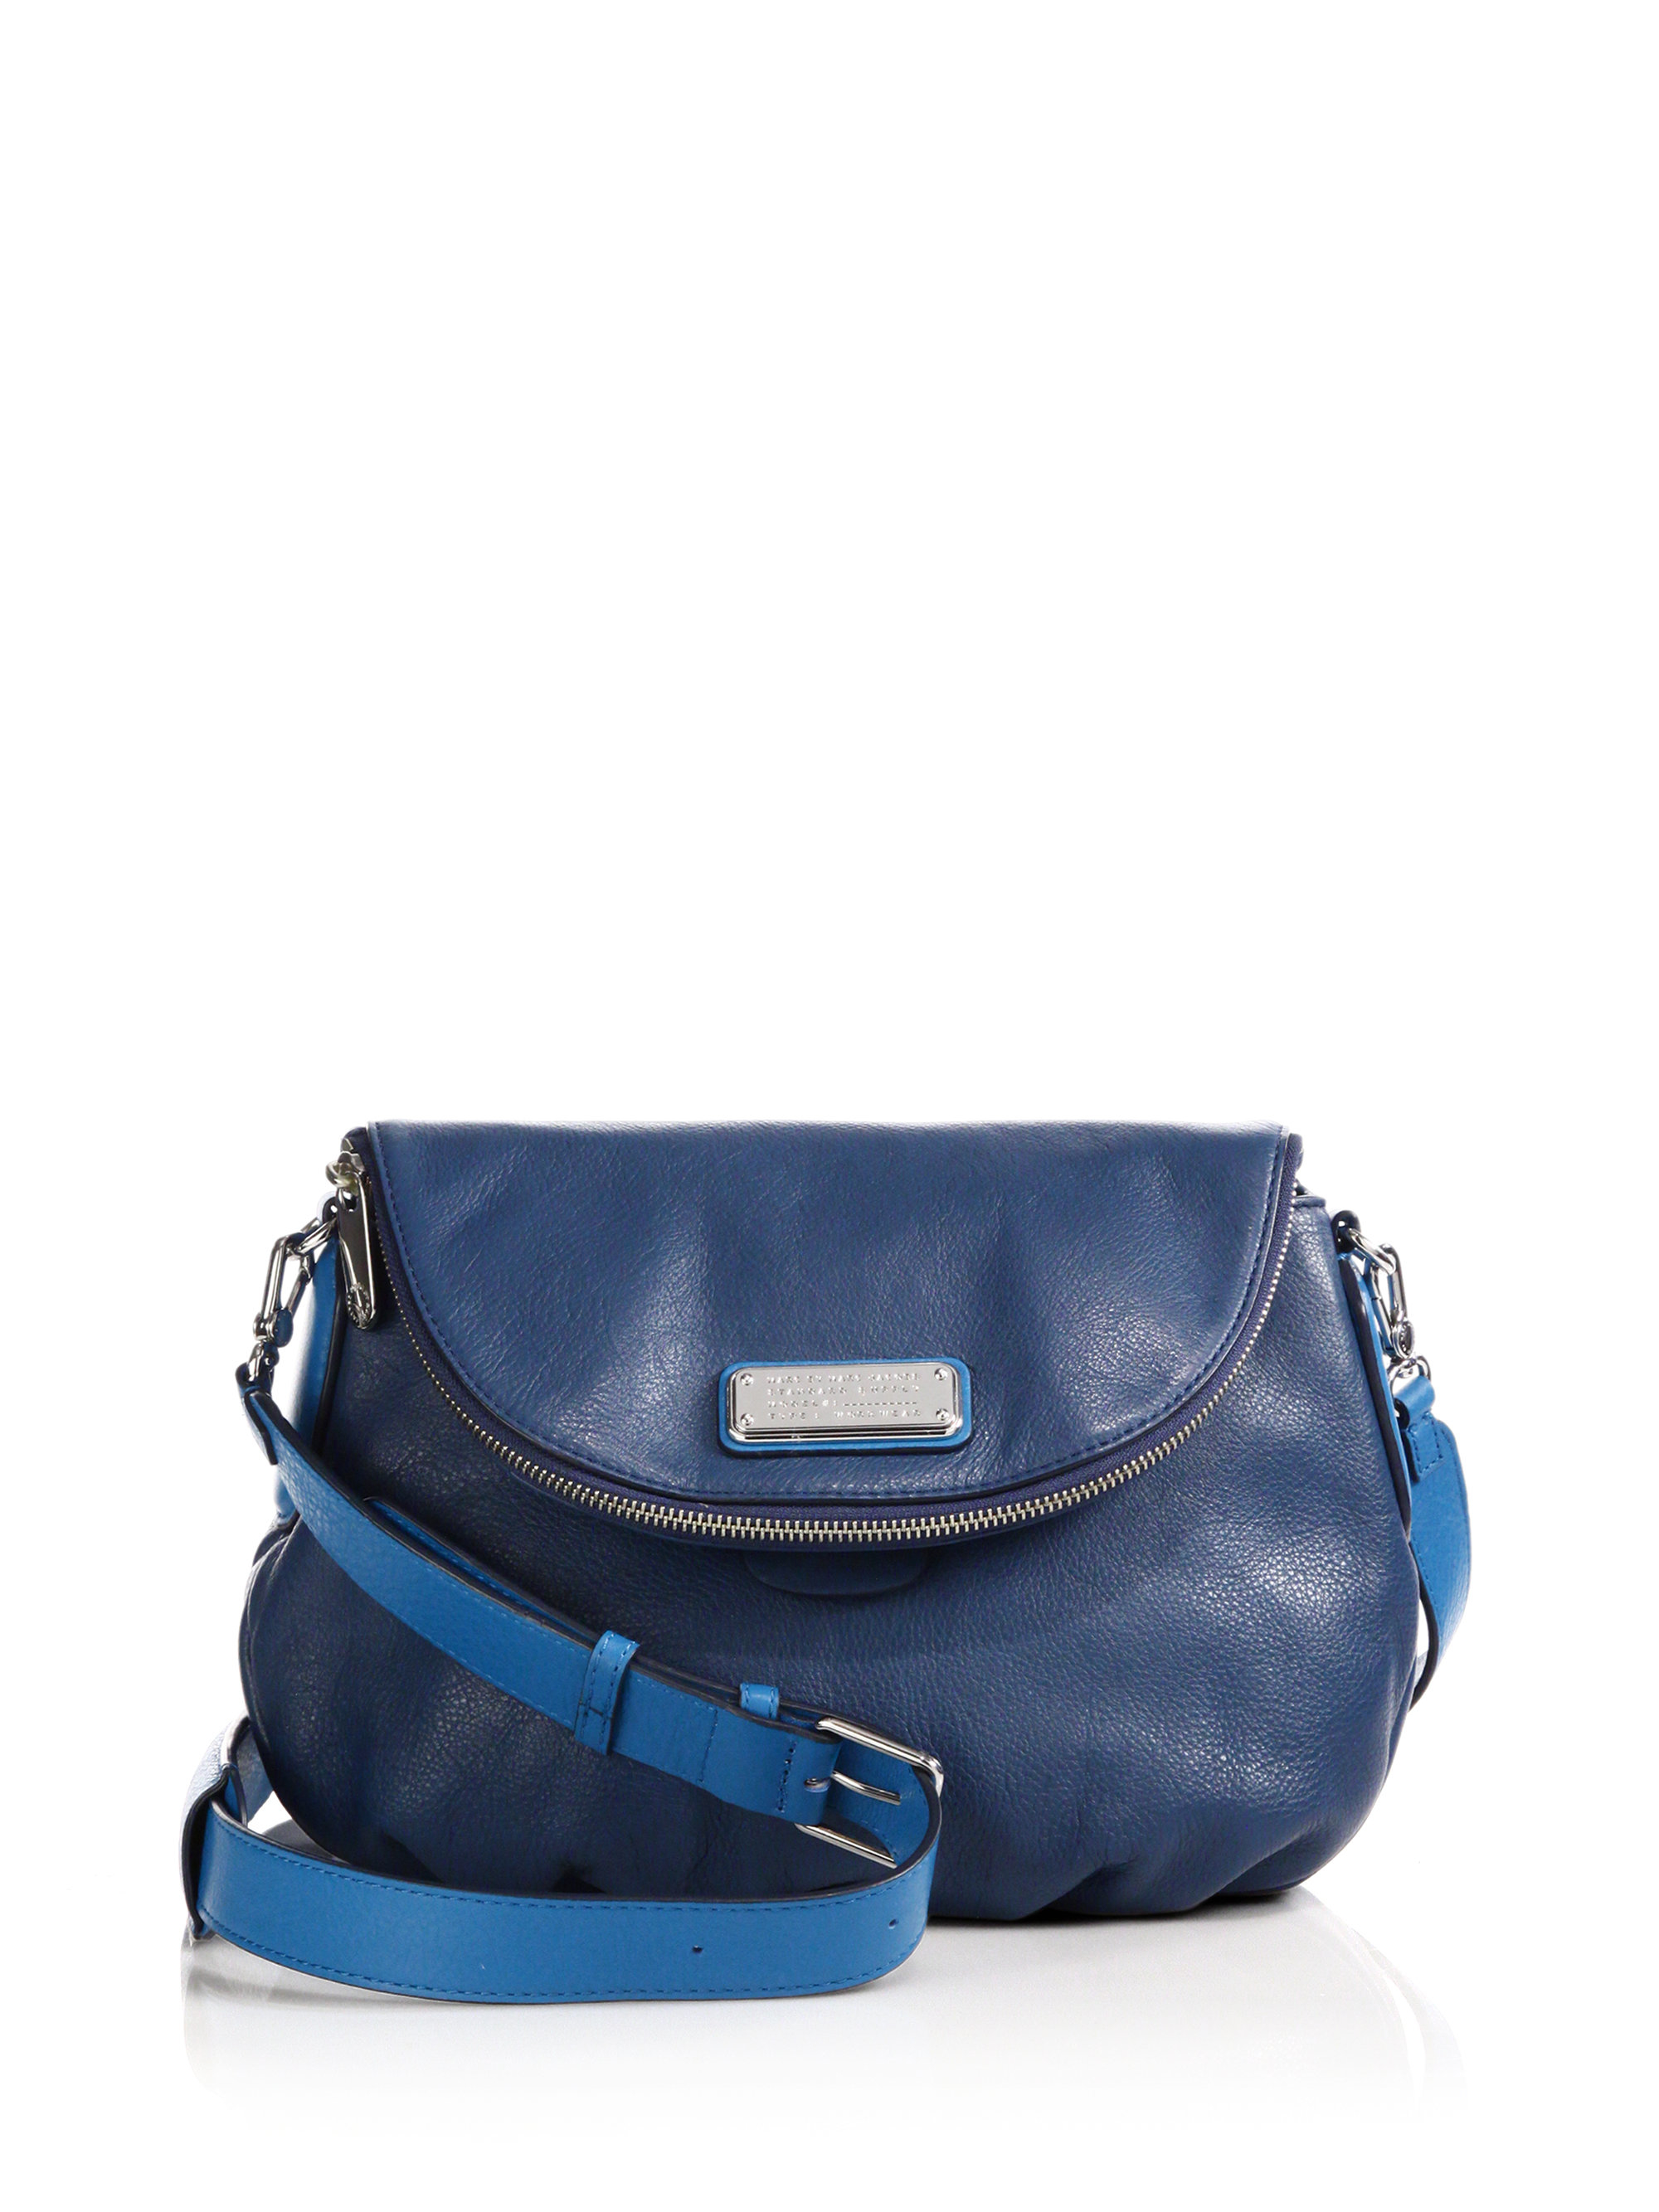 Marc By Marc Jacobs Classic Q Natasha Two-tone Leather Crossbody Bag in  Deep Blue (Blue) - Lyst